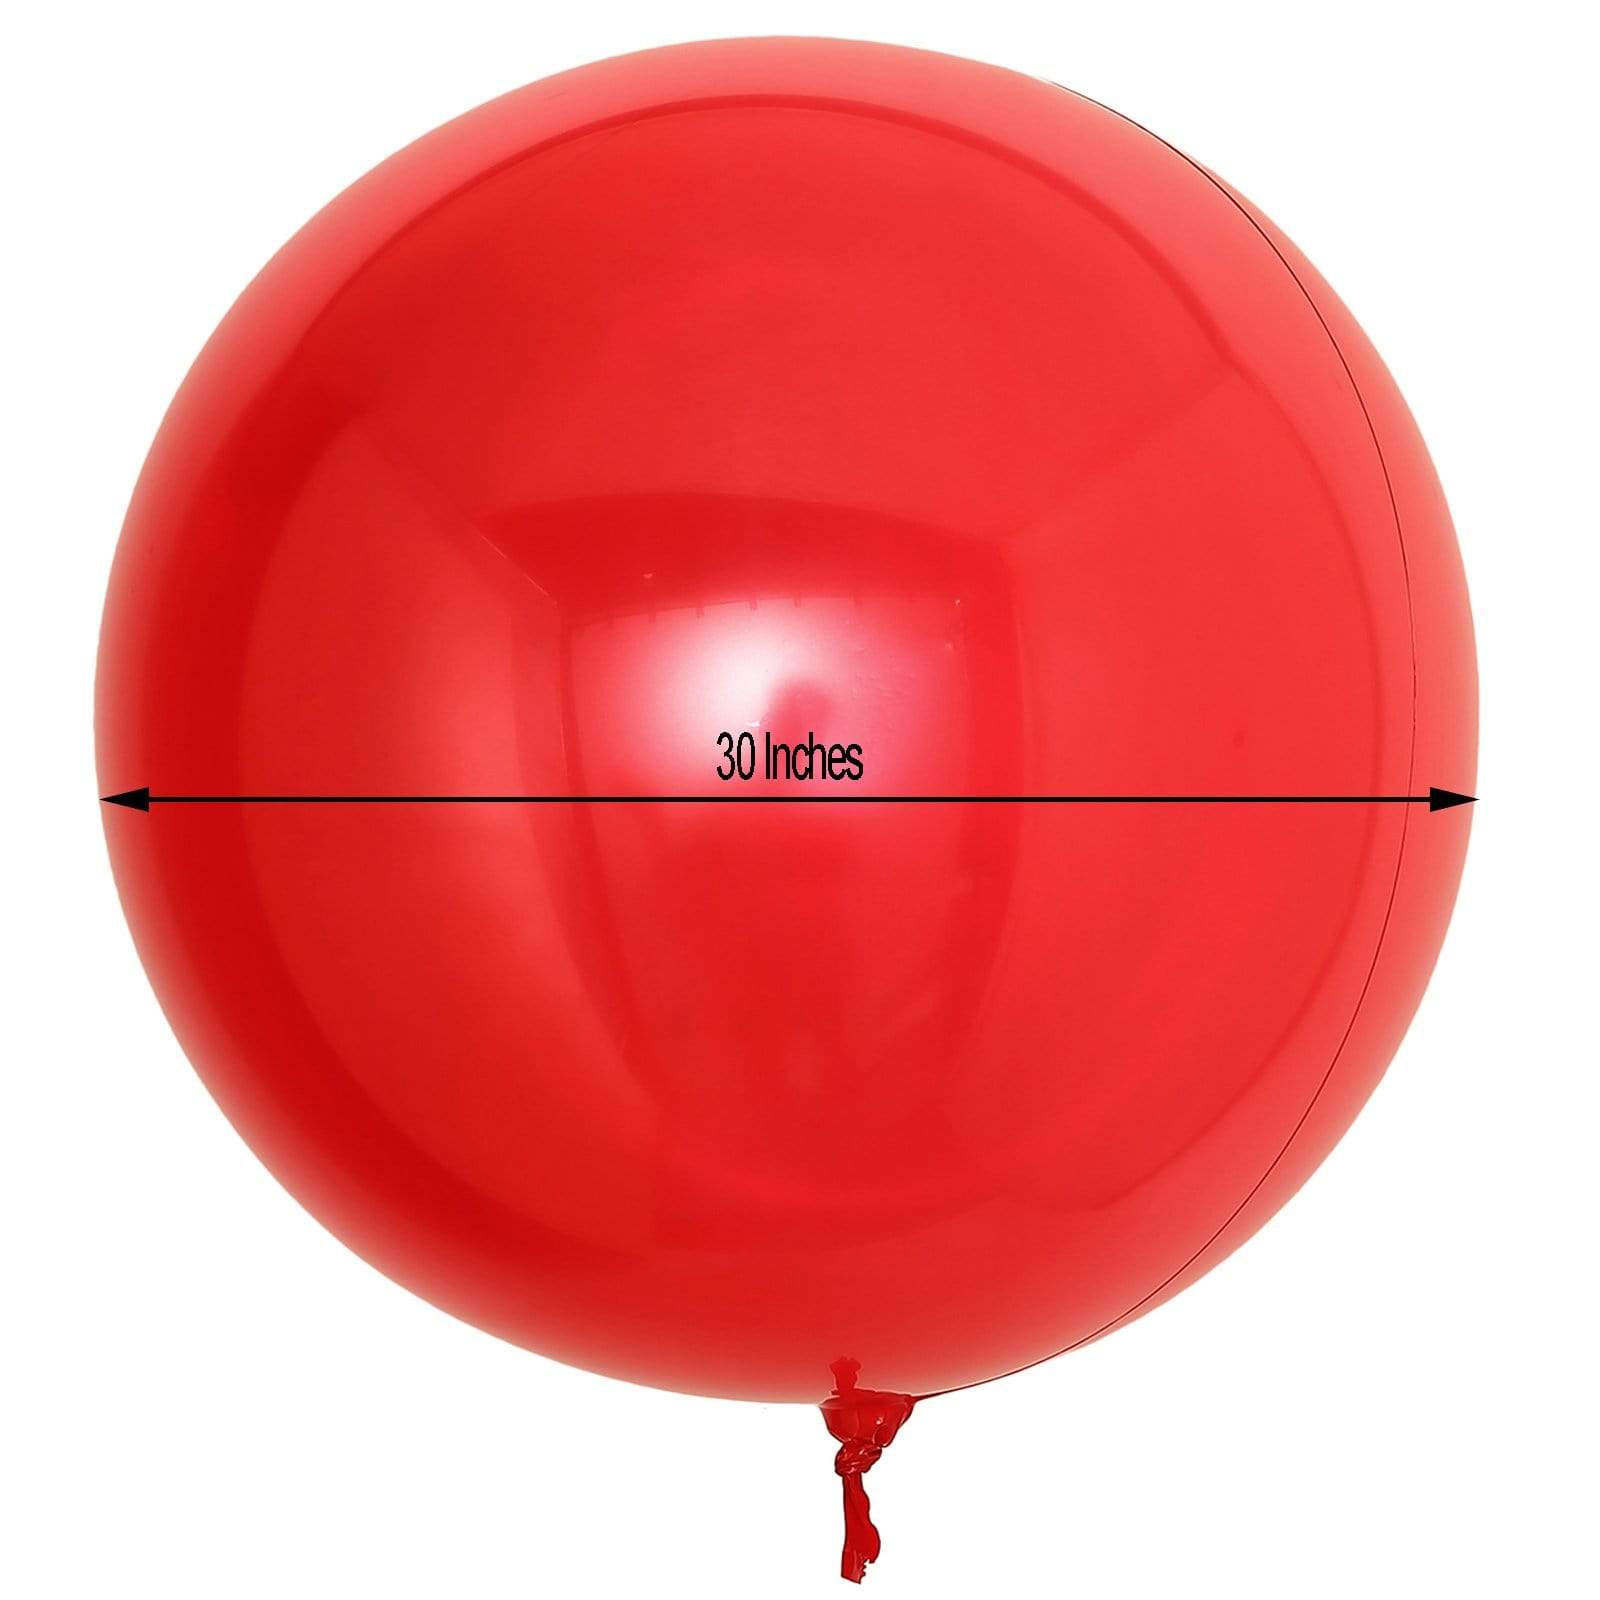 2 pcs 30 in wide Large Round Vinyl Balloons